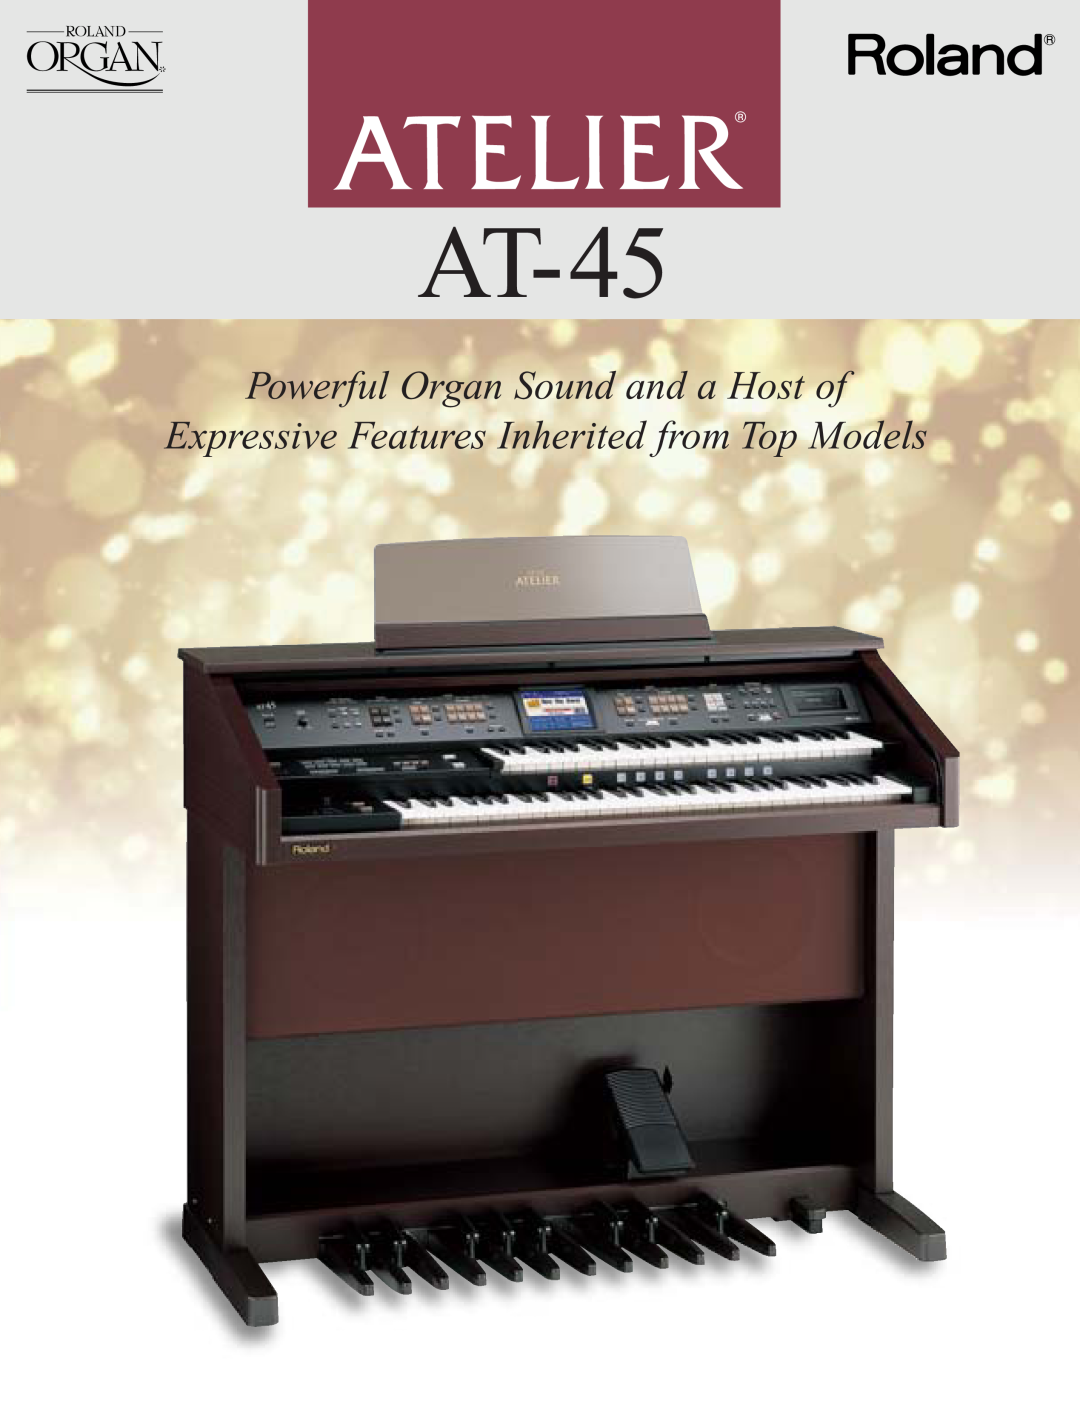 Roland AT-45 manual Powerful Organ Sound and a Host of, Expressive Features Inherited from Top Models 